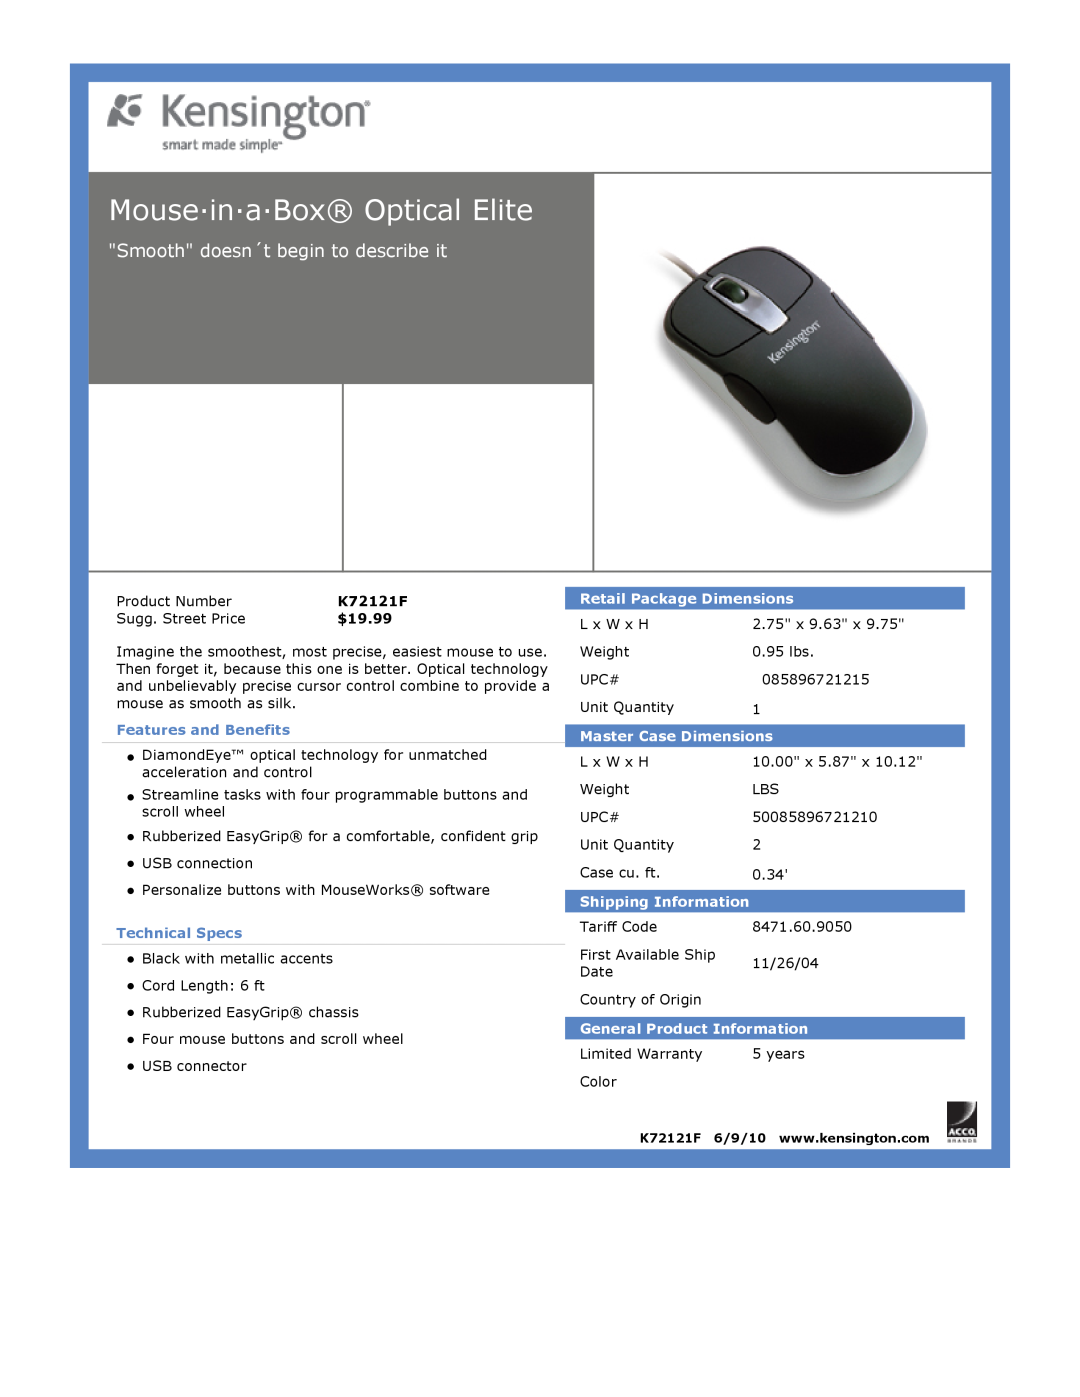 Kensington EU64325 Mouse·in·a·Box Optical Elite, Smooth doesn´t begin to describe it, $19.99, Features and Benefits 